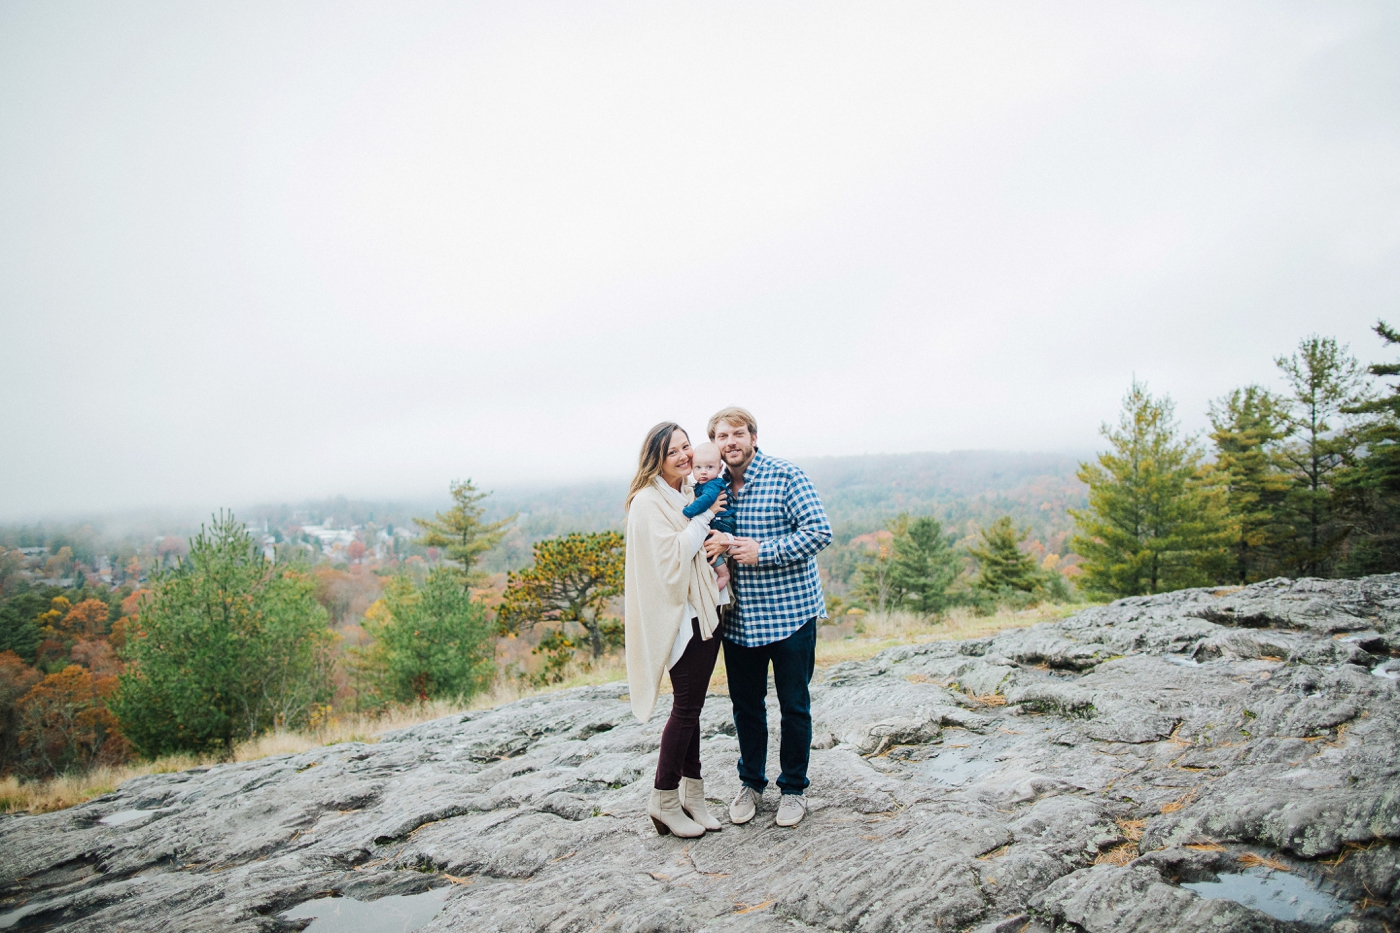 Mountain family session by Izzy and Co. Savannah and Atlanta family photographer.